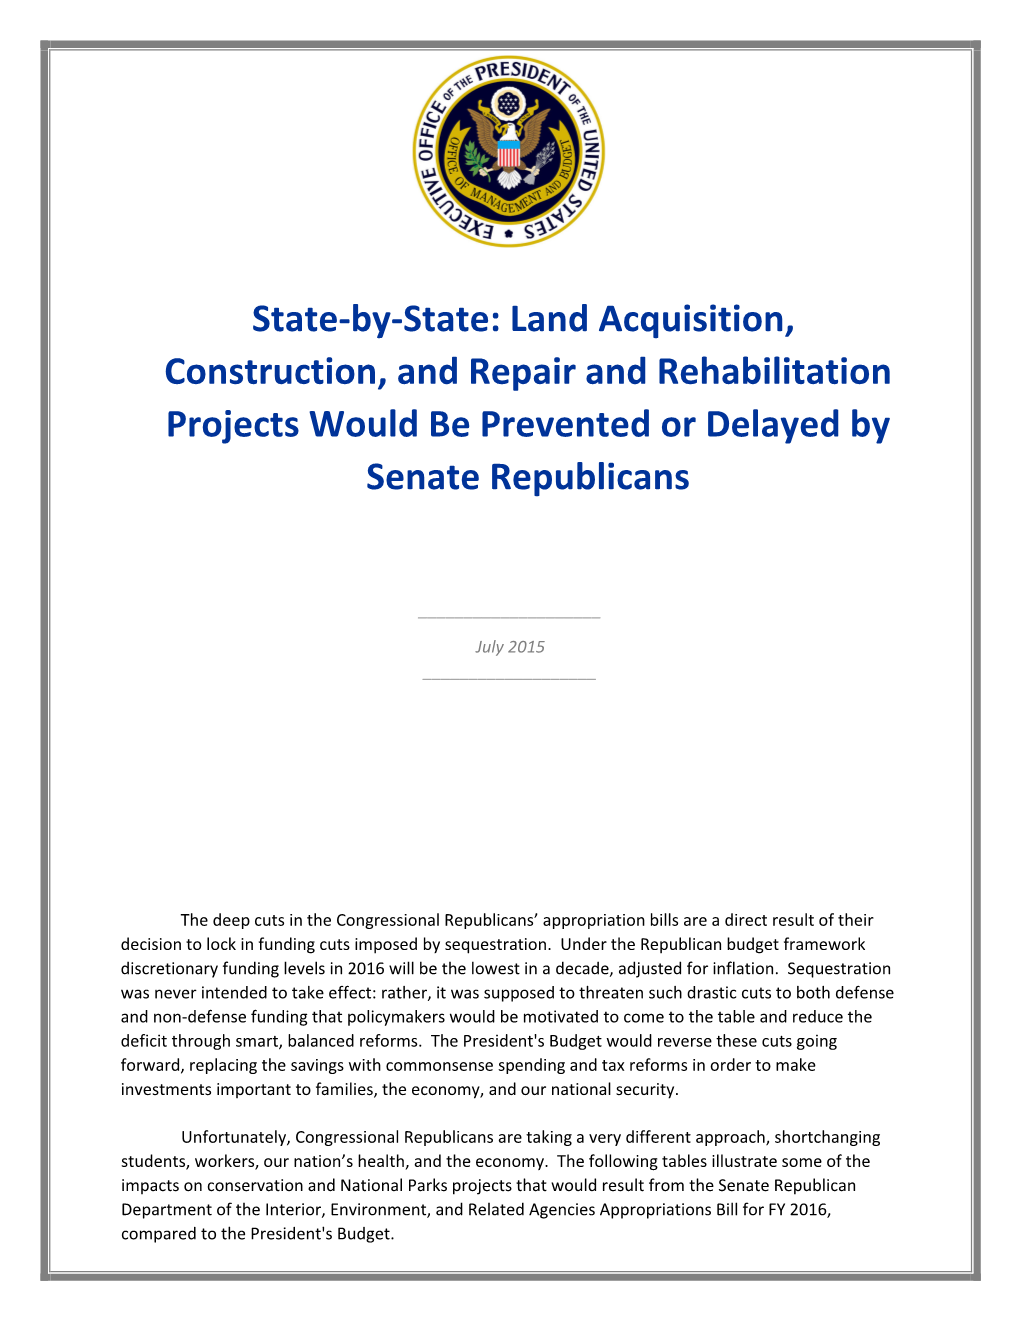 State-By-State: Land Acquisition, Construction, and Repair and Rehabilitation Projects Would Be Prevented Or Delayed by Senate Republicans